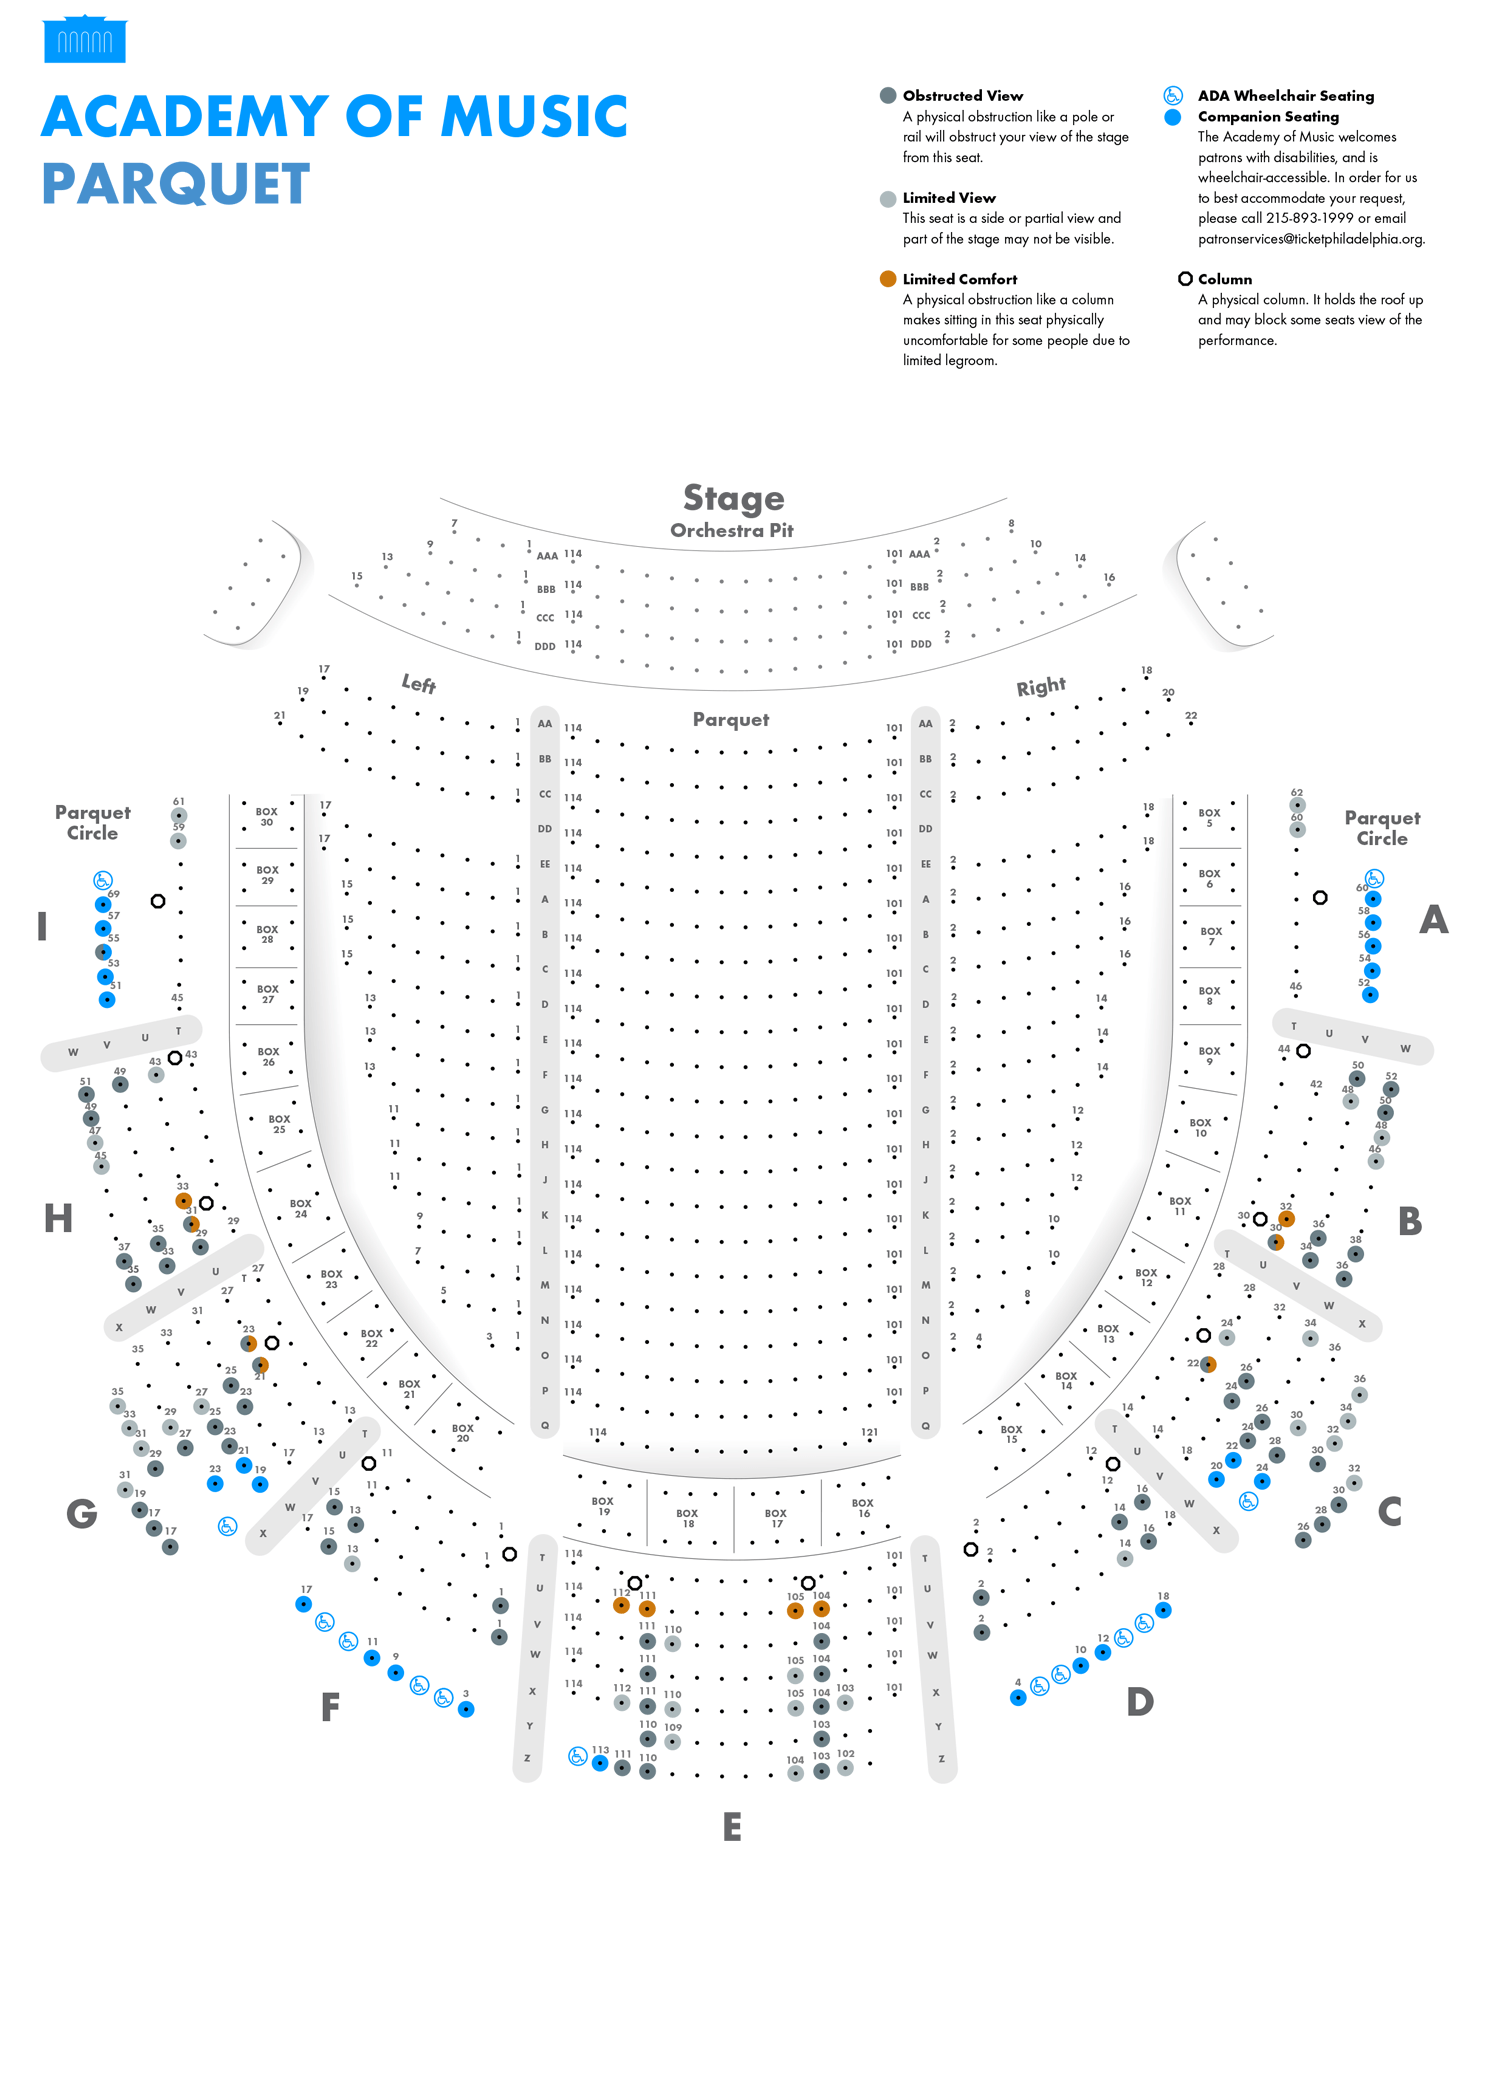 Academy of Music Broadway Seating Charts - Kimmel Center